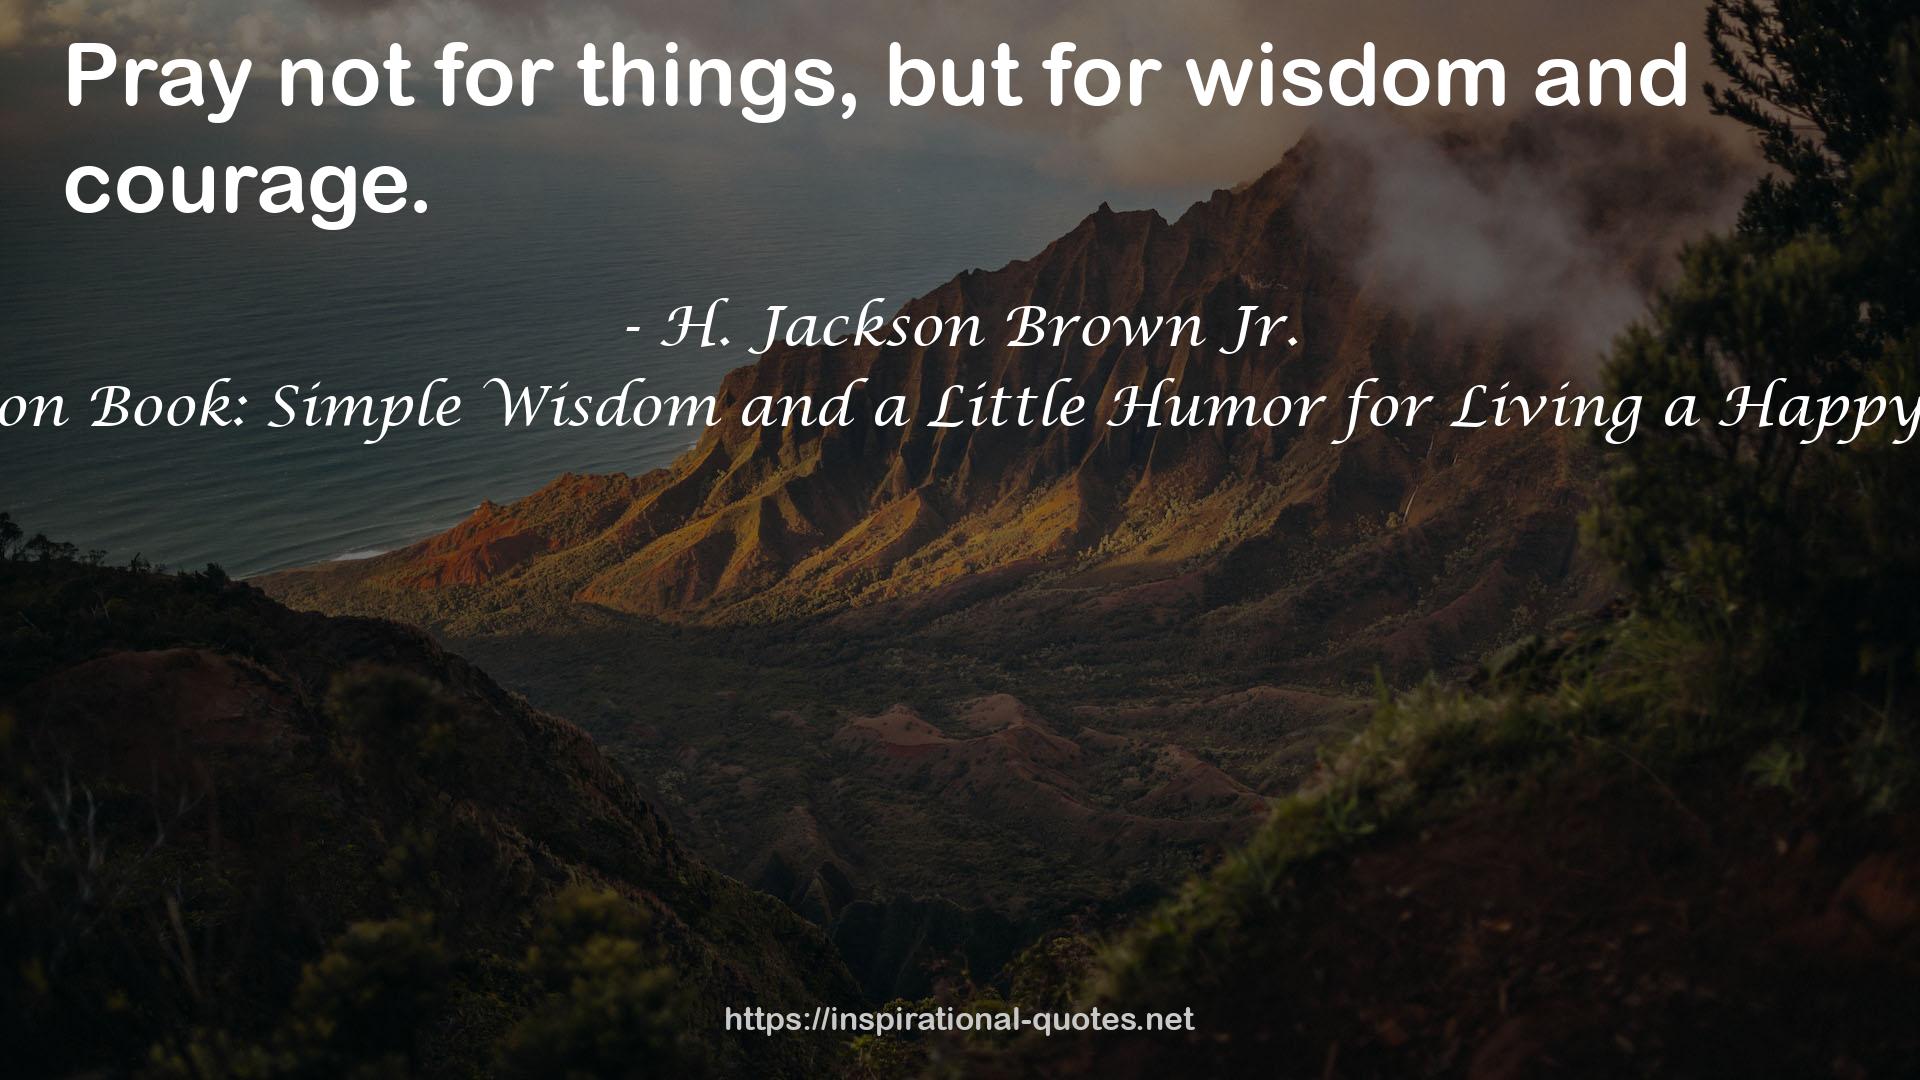 Life's Little Instruction Book: Simple Wisdom and a Little Humor for Living a Happy and Rewarding Life QUOTES